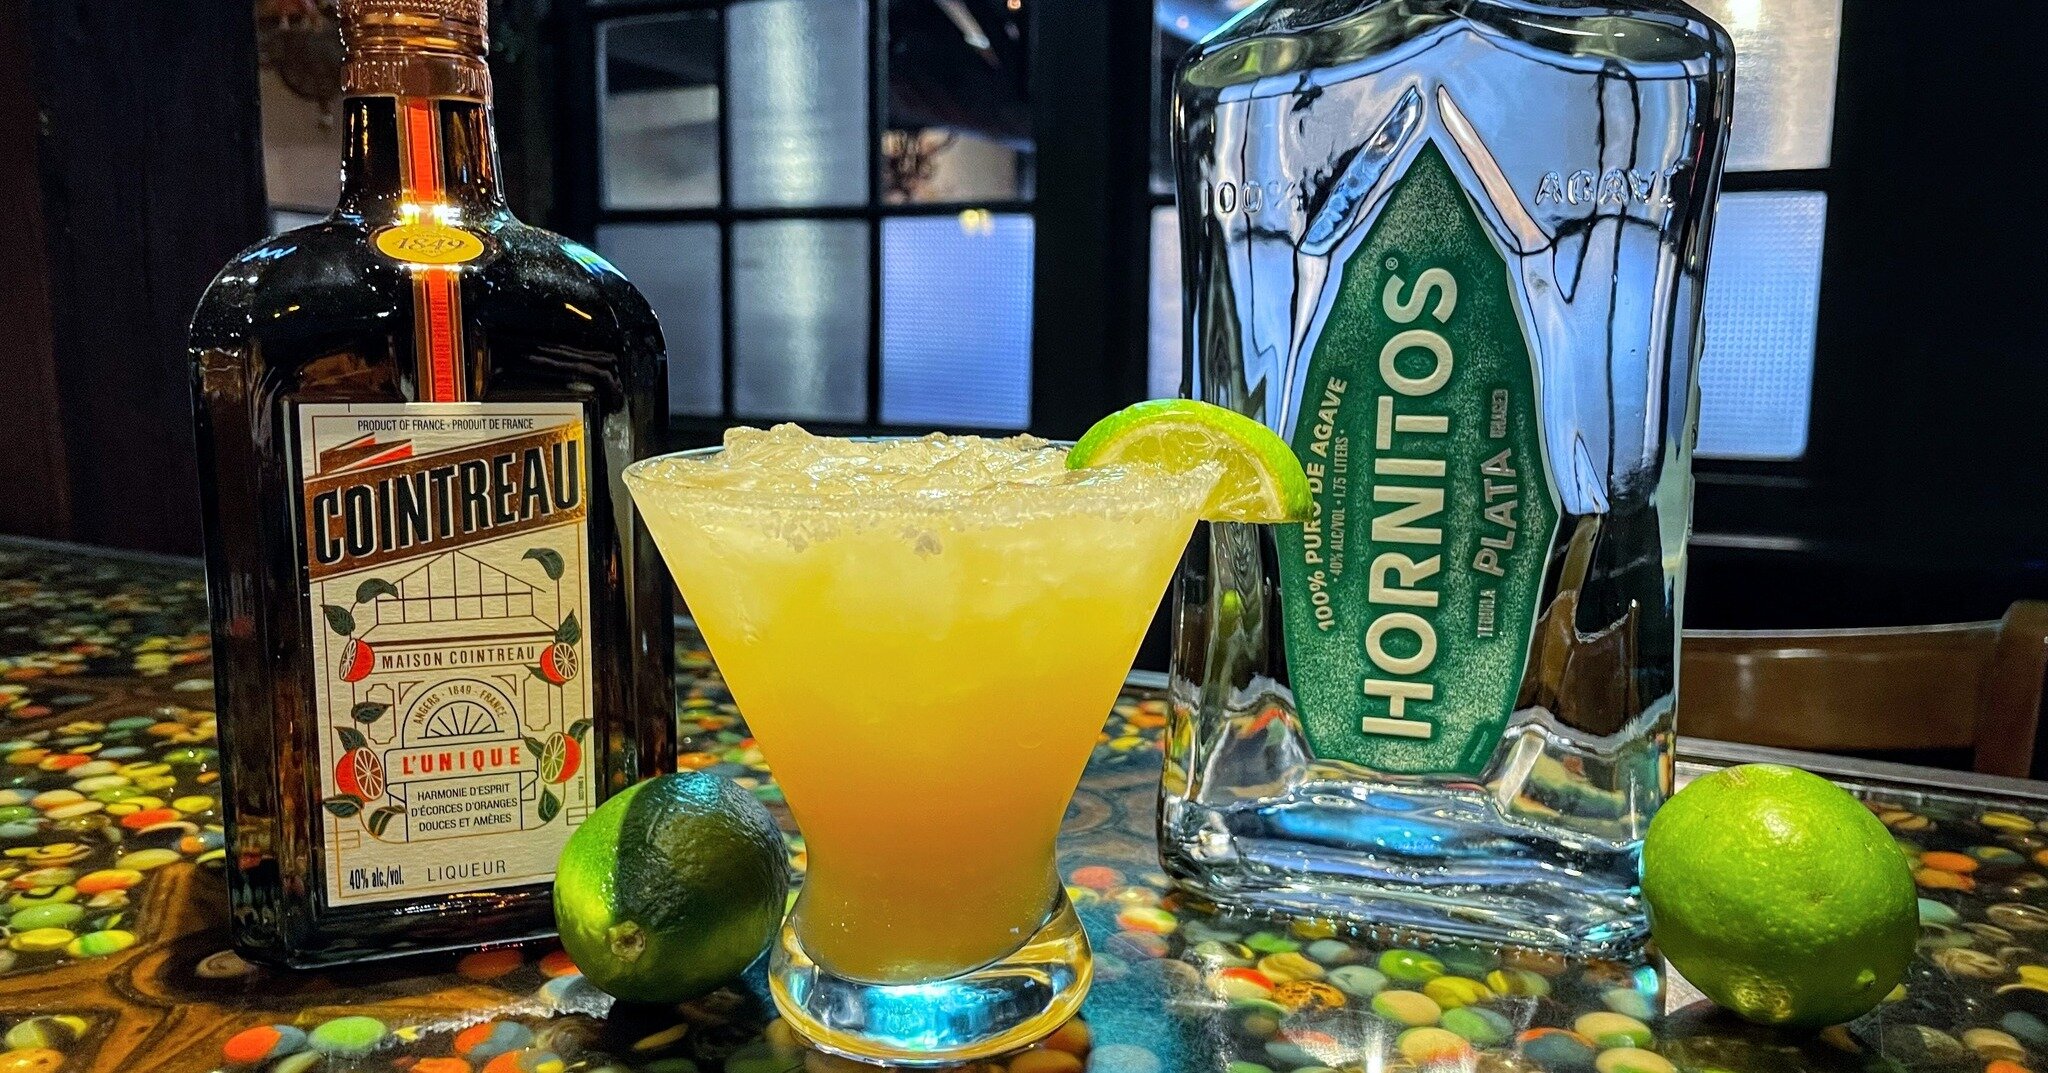 Planning to celebrate a mom in your life this weekend? Come to Amigos for delicious food and a hand-shaken margarita. Or try one of our spirit-free 'sobrio' lineup like the Mock-arita or Ginger Fizz!